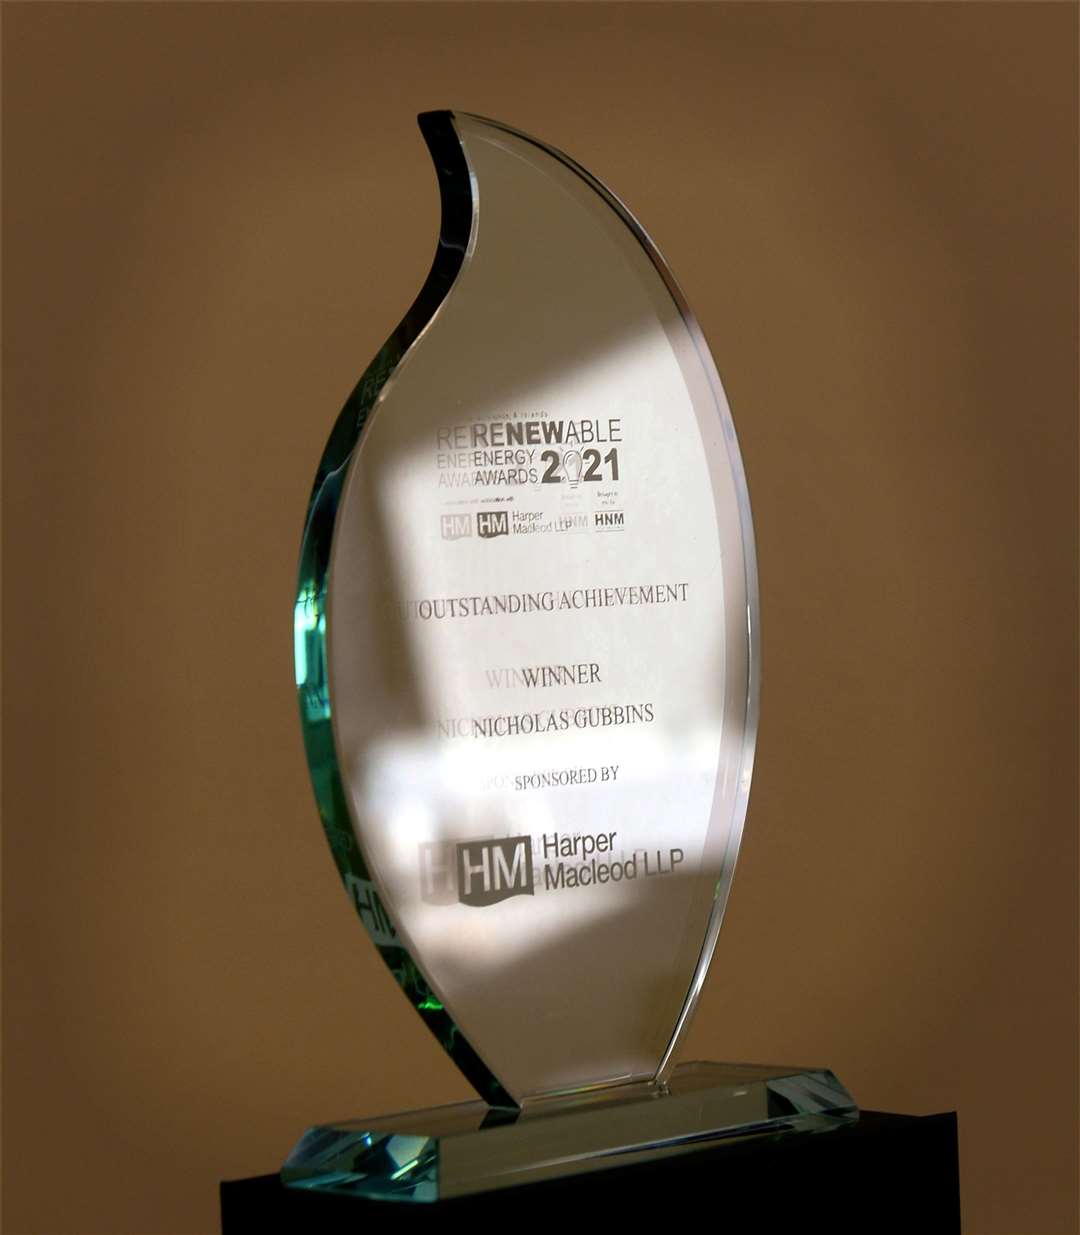 Each winner in the Highlands and Islands Renewable Energy virtual awards 2021 will receive a trophy.